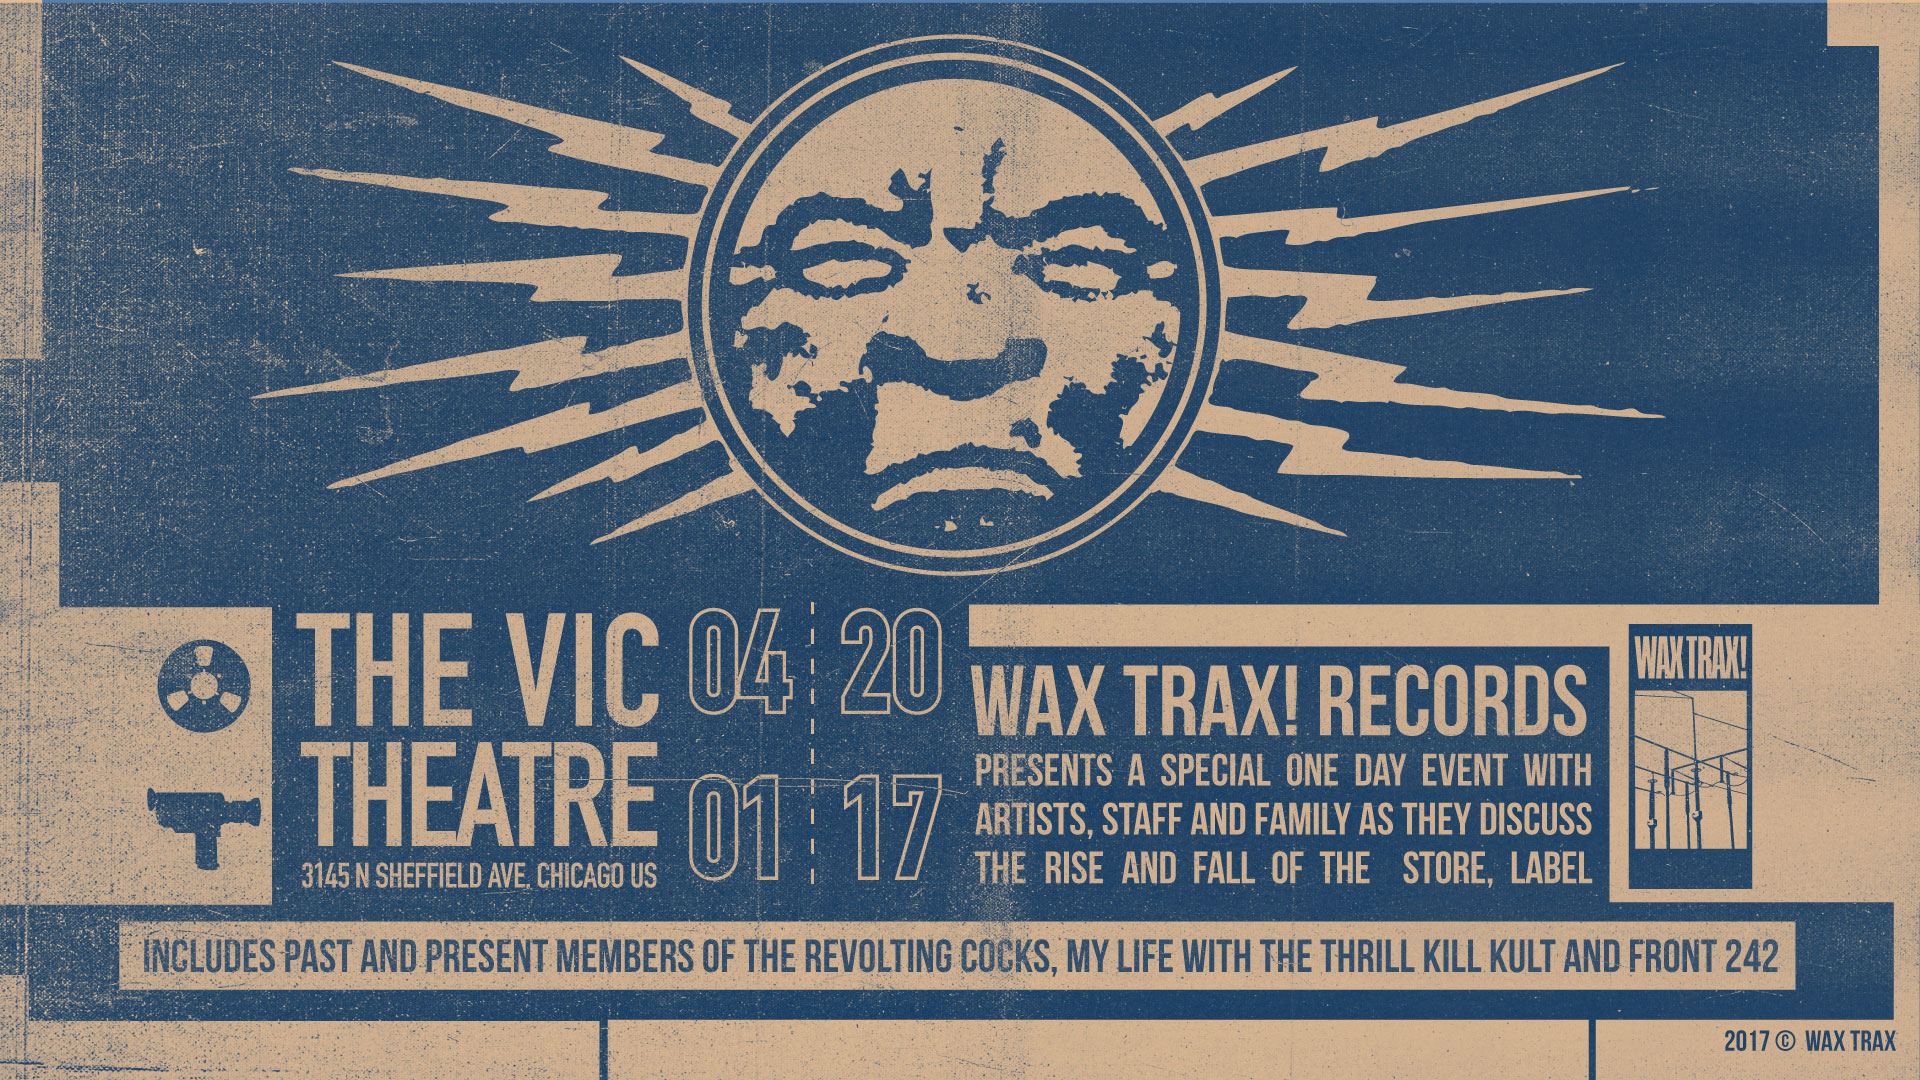 Wax Trax! Records Schedules Panel Discussions With Q&A For Upcoming Documentary Release